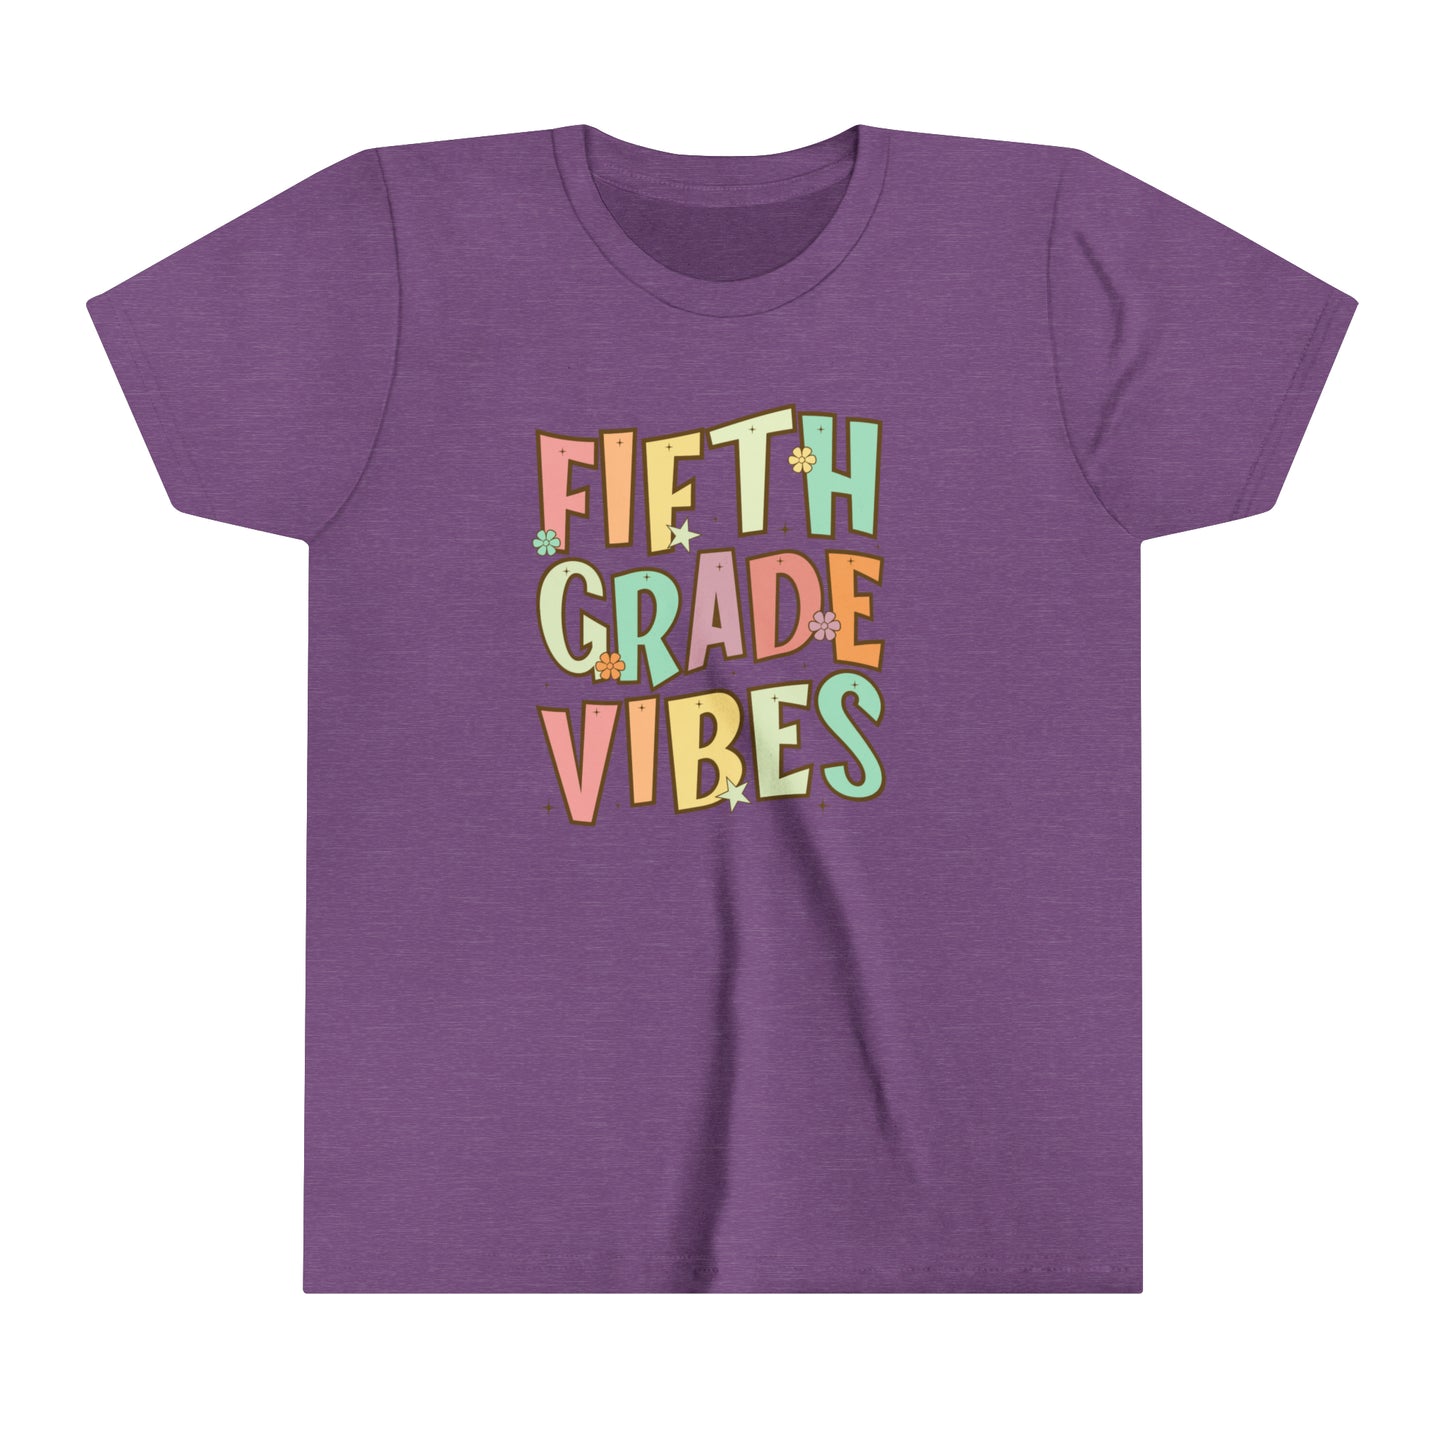 Fifth Grade Vibes Girl's Youth Short Sleeve Tee